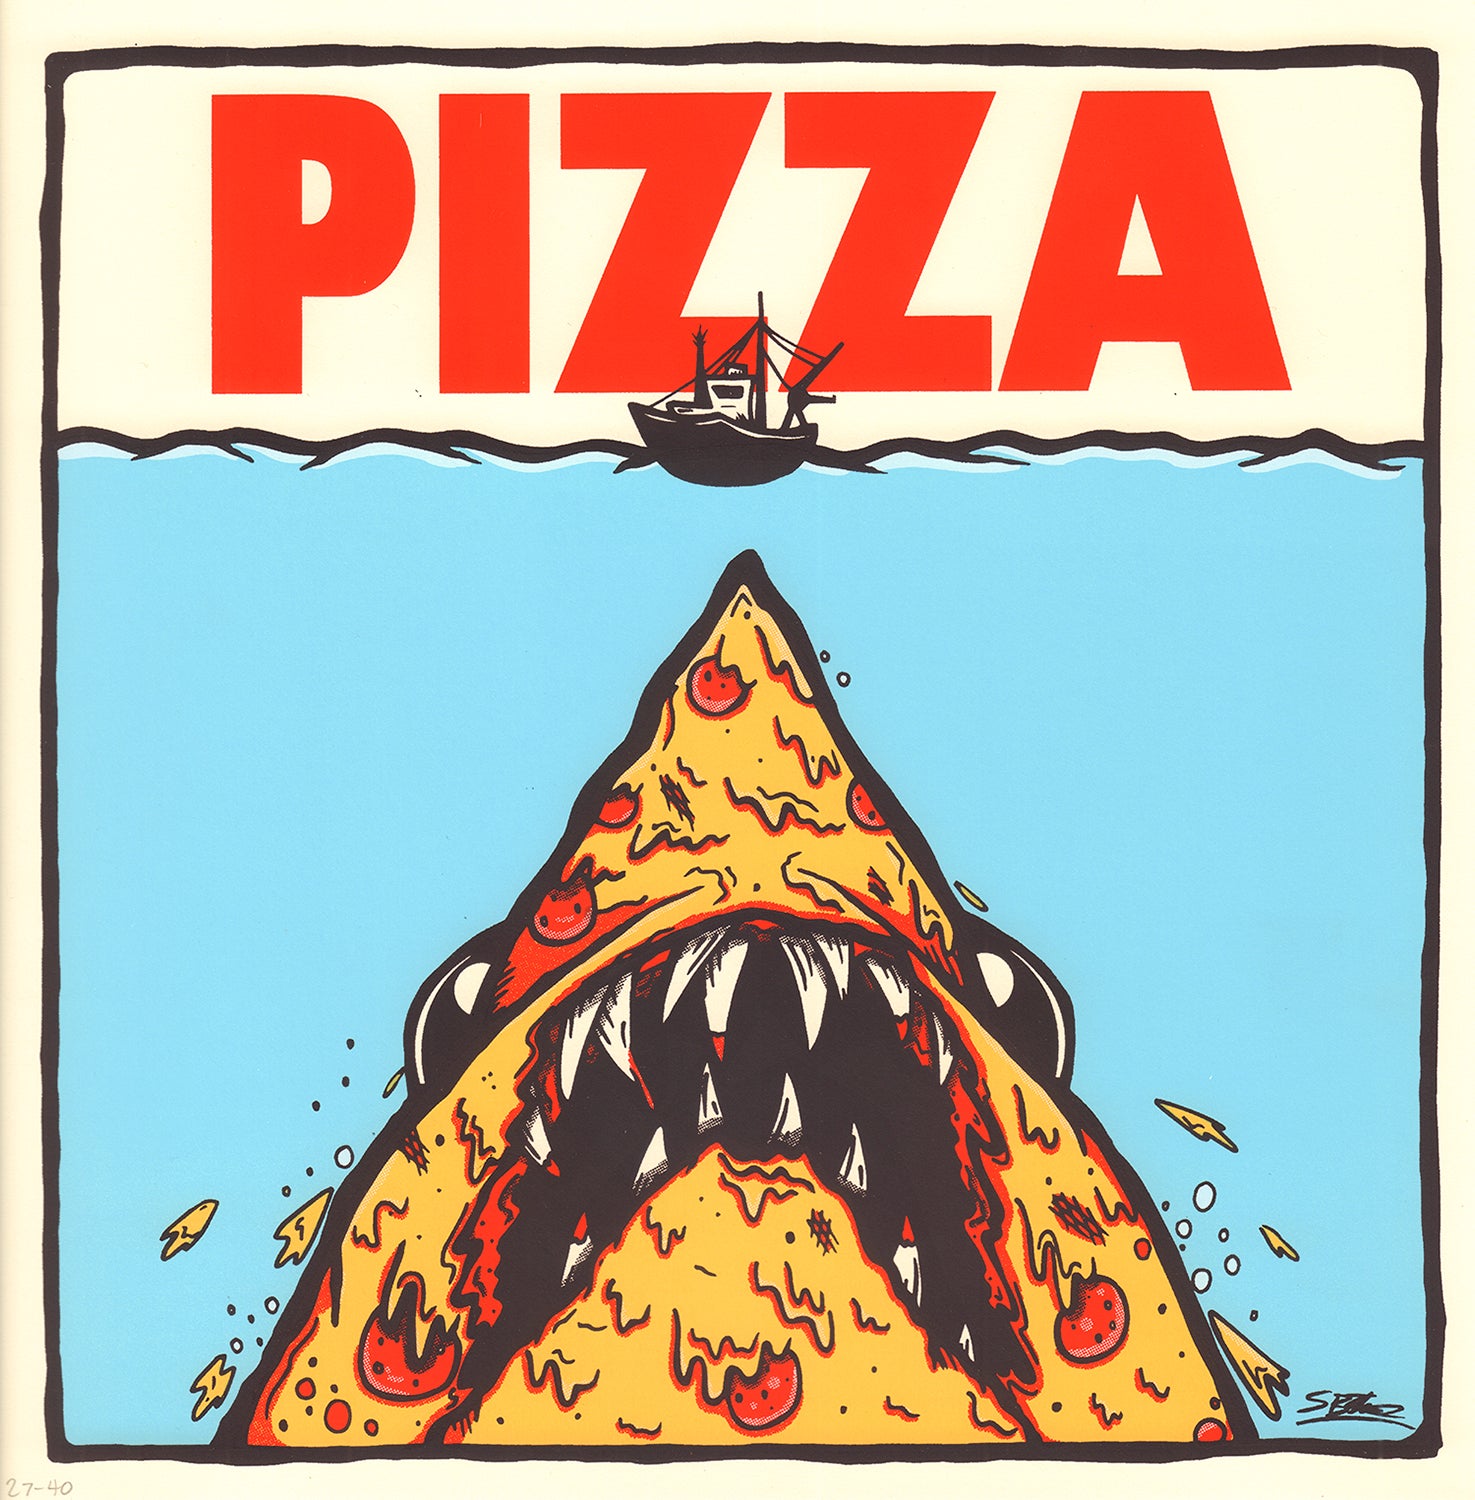 Jaws Pizza